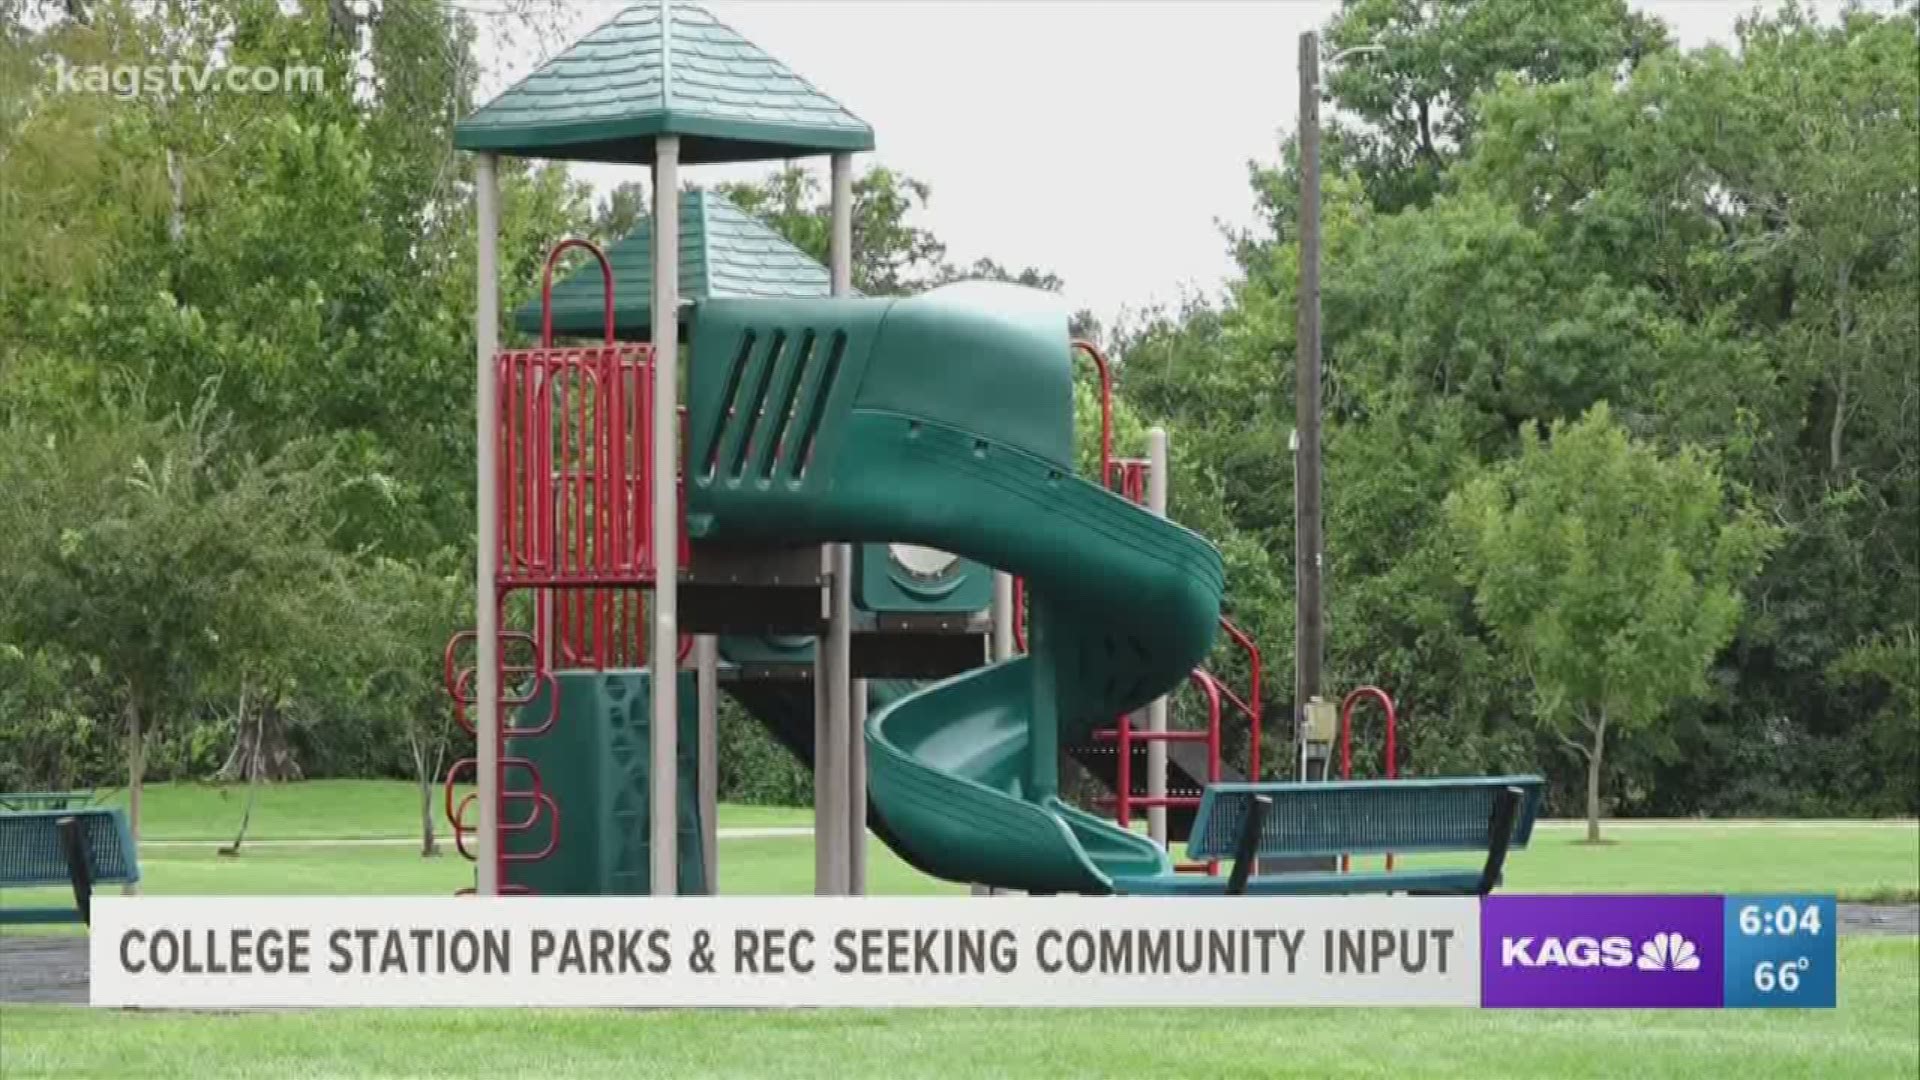 The city of College Station is looking for community input on how they can enhance parks and recreation.